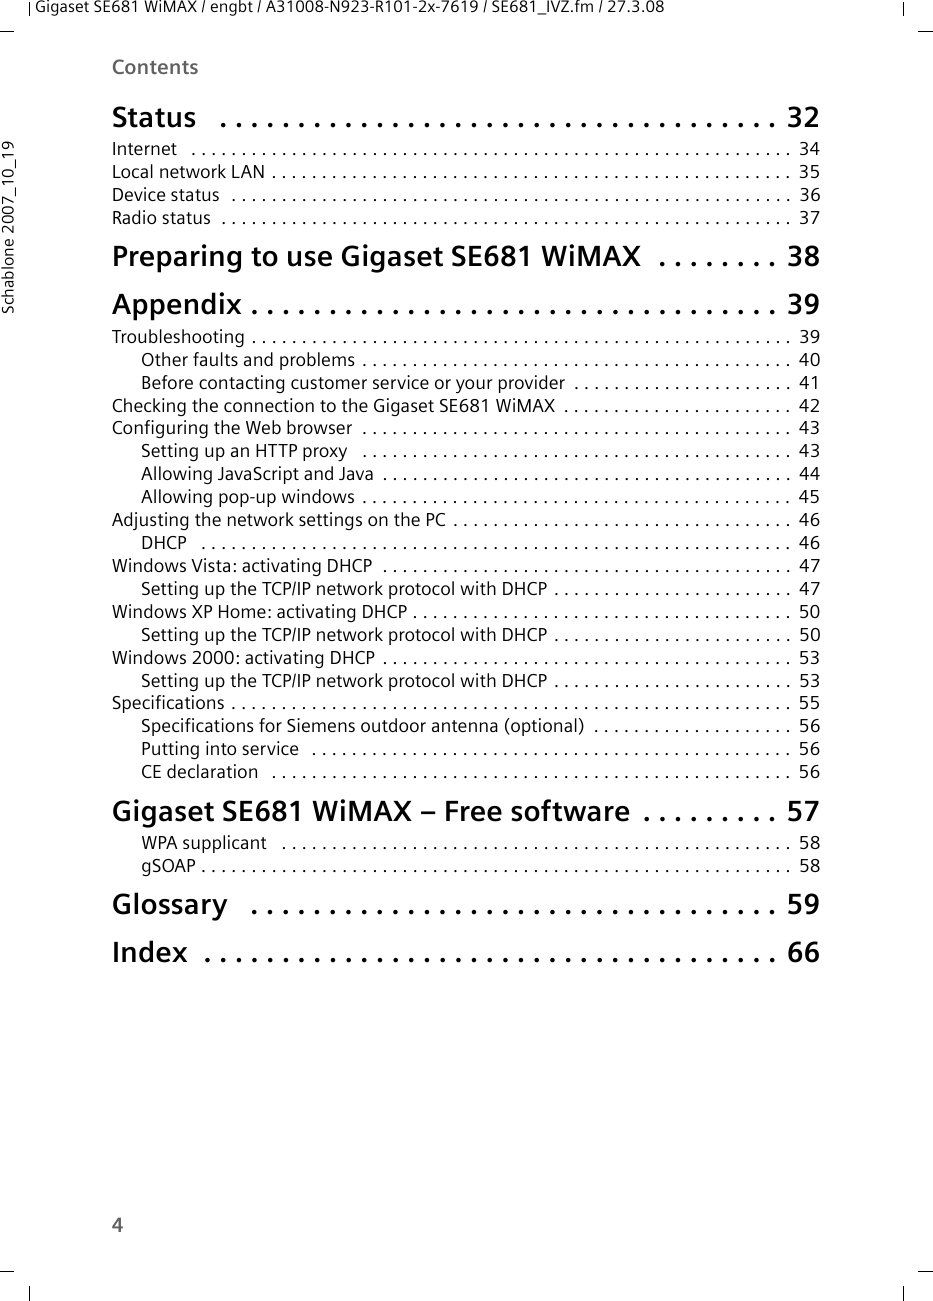 4ContentsGigaset SE681 WiMAX / engbt / A31008-N923-R101-2x-7619 / SE681_IVZ.fm / 27.3.08Schablone 2007_10_19Status  . . . . . . . . . . . . . . . . . . . . . . . . . . . . . . . . . . . . 32Internet  . . . . . . . . . . . . . . . . . . . . . . . . . . . . . . . . . . . . . . . . . . . . . . . . . . . . . . . . . . . .34Local network LAN . . . . . . . . . . . . . . . . . . . . . . . . . . . . . . . . . . . . . . . . . . . . . . . . . . . . 35Device status  . . . . . . . . . . . . . . . . . . . . . . . . . . . . . . . . . . . . . . . . . . . . . . . . . . . . . . . . 36Radio status  . . . . . . . . . . . . . . . . . . . . . . . . . . . . . . . . . . . . . . . . . . . . . . . . . . . . . . . . . 37Preparing to use Gigaset SE681 WiMAX  . . . . . . . . 38Appendix . . . . . . . . . . . . . . . . . . . . . . . . . . . . . . . . . . 39Troubleshooting . . . . . . . . . . . . . . . . . . . . . . . . . . . . . . . . . . . . . . . . . . . . . . . . . . . . . . 39Other faults and problems . . . . . . . . . . . . . . . . . . . . . . . . . . . . . . . . . . . . . . . . . . . 40Before contacting customer service or your provider . . . . . . . . . . . . . . . . . . . . . . 41Checking the connection to the Gigaset SE681 WiMAX . . . . . . . . . . . . . . . . . . . . . . . 42Configuring the Web browser  . . . . . . . . . . . . . . . . . . . . . . . . . . . . . . . . . . . . . . . . . . . 43Setting up an HTTP proxy  . . . . . . . . . . . . . . . . . . . . . . . . . . . . . . . . . . . . . . . . . . . 43Allowing JavaScript and Java . . . . . . . . . . . . . . . . . . . . . . . . . . . . . . . . . . . . . . . . . 44Allowing pop-up windows . . . . . . . . . . . . . . . . . . . . . . . . . . . . . . . . . . . . . . . . . . . 45Adjusting the network settings on the PC . . . . . . . . . . . . . . . . . . . . . . . . . . . . . . . . . . 46DHCP  . . . . . . . . . . . . . . . . . . . . . . . . . . . . . . . . . . . . . . . . . . . . . . . . . . . . . . . . . . . 46Windows Vista: activating DHCP  . . . . . . . . . . . . . . . . . . . . . . . . . . . . . . . . . . . . . . . . . 47Setting up the TCP/IP network protocol with DHCP . . . . . . . . . . . . . . . . . . . . . . . . 47Windows XP Home: activating DHCP . . . . . . . . . . . . . . . . . . . . . . . . . . . . . . . . . . . . . . 50Setting up the TCP/IP network protocol with DHCP . . . . . . . . . . . . . . . . . . . . . . . . 50Windows 2000: activating DHCP . . . . . . . . . . . . . . . . . . . . . . . . . . . . . . . . . . . . . . . . . 53Setting up the TCP/IP network protocol with DHCP . . . . . . . . . . . . . . . . . . . . . . . . 53Specifications . . . . . . . . . . . . . . . . . . . . . . . . . . . . . . . . . . . . . . . . . . . . . . . . . . . . . . . . 55Specifications for Siemens outdoor antenna (optional) . . . . . . . . . . . . . . . . . . . . 56Putting into service  . . . . . . . . . . . . . . . . . . . . . . . . . . . . . . . . . . . . . . . . . . . . . . . . 56CE declaration  . . . . . . . . . . . . . . . . . . . . . . . . . . . . . . . . . . . . . . . . . . . . . . . . . . . . 56Gigaset SE681 WiMAX – Free software . . . . . . . . . 57WPA supplicant  . . . . . . . . . . . . . . . . . . . . . . . . . . . . . . . . . . . . . . . . . . . . . . . . . . . 58gSOAP . . . . . . . . . . . . . . . . . . . . . . . . . . . . . . . . . . . . . . . . . . . . . . . . . . . . . . . . . . . 58Glossary  . . . . . . . . . . . . . . . . . . . . . . . . . . . . . . . . . . 59Index  . . . . . . . . . . . . . . . . . . . . . . . . . . . . . . . . . . . . . 66